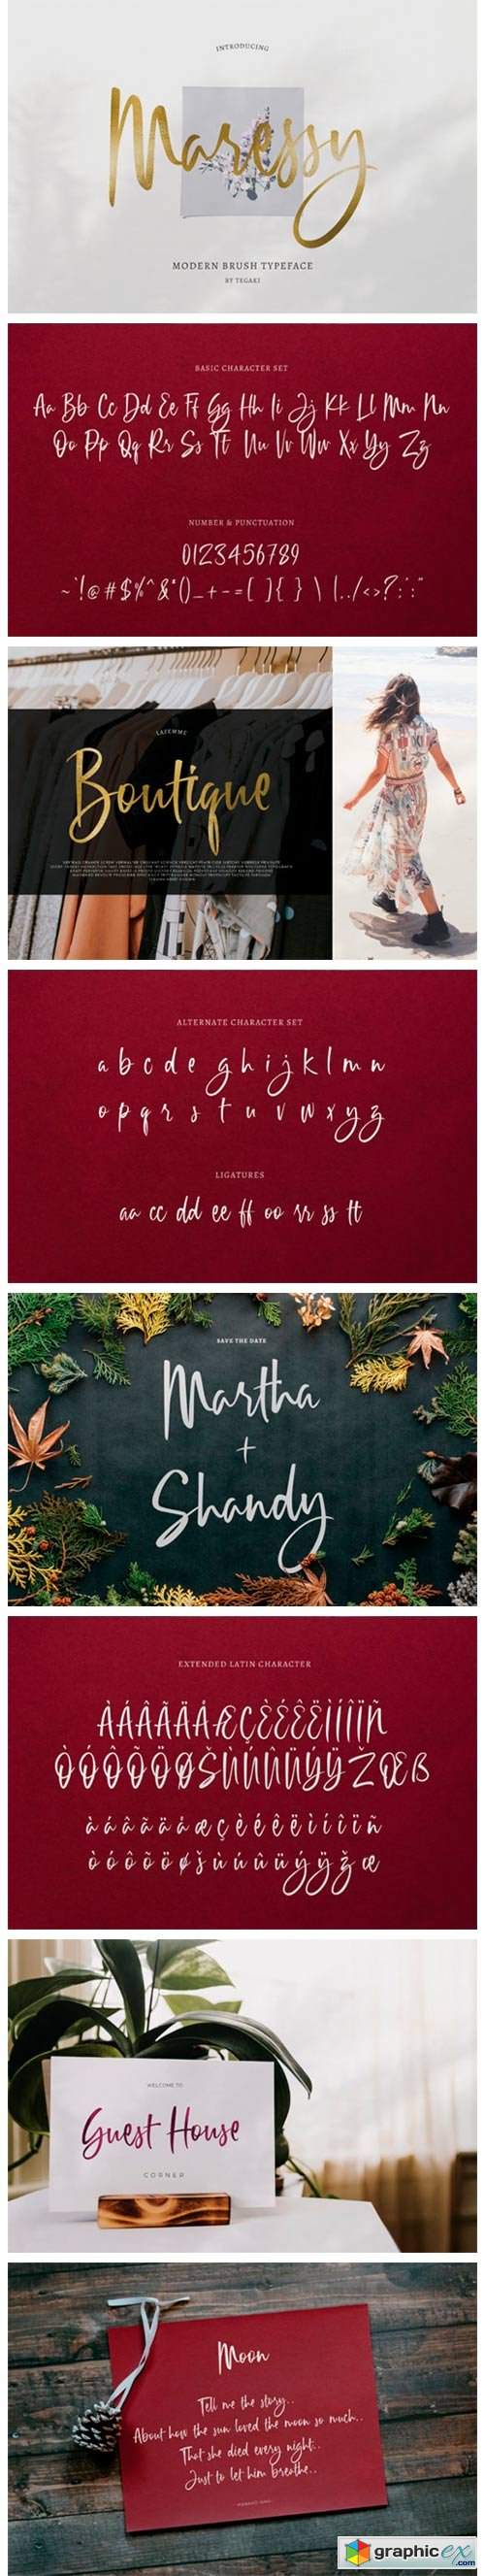 Maressy Font Free Download Vector Stock Image Photoshop Icon